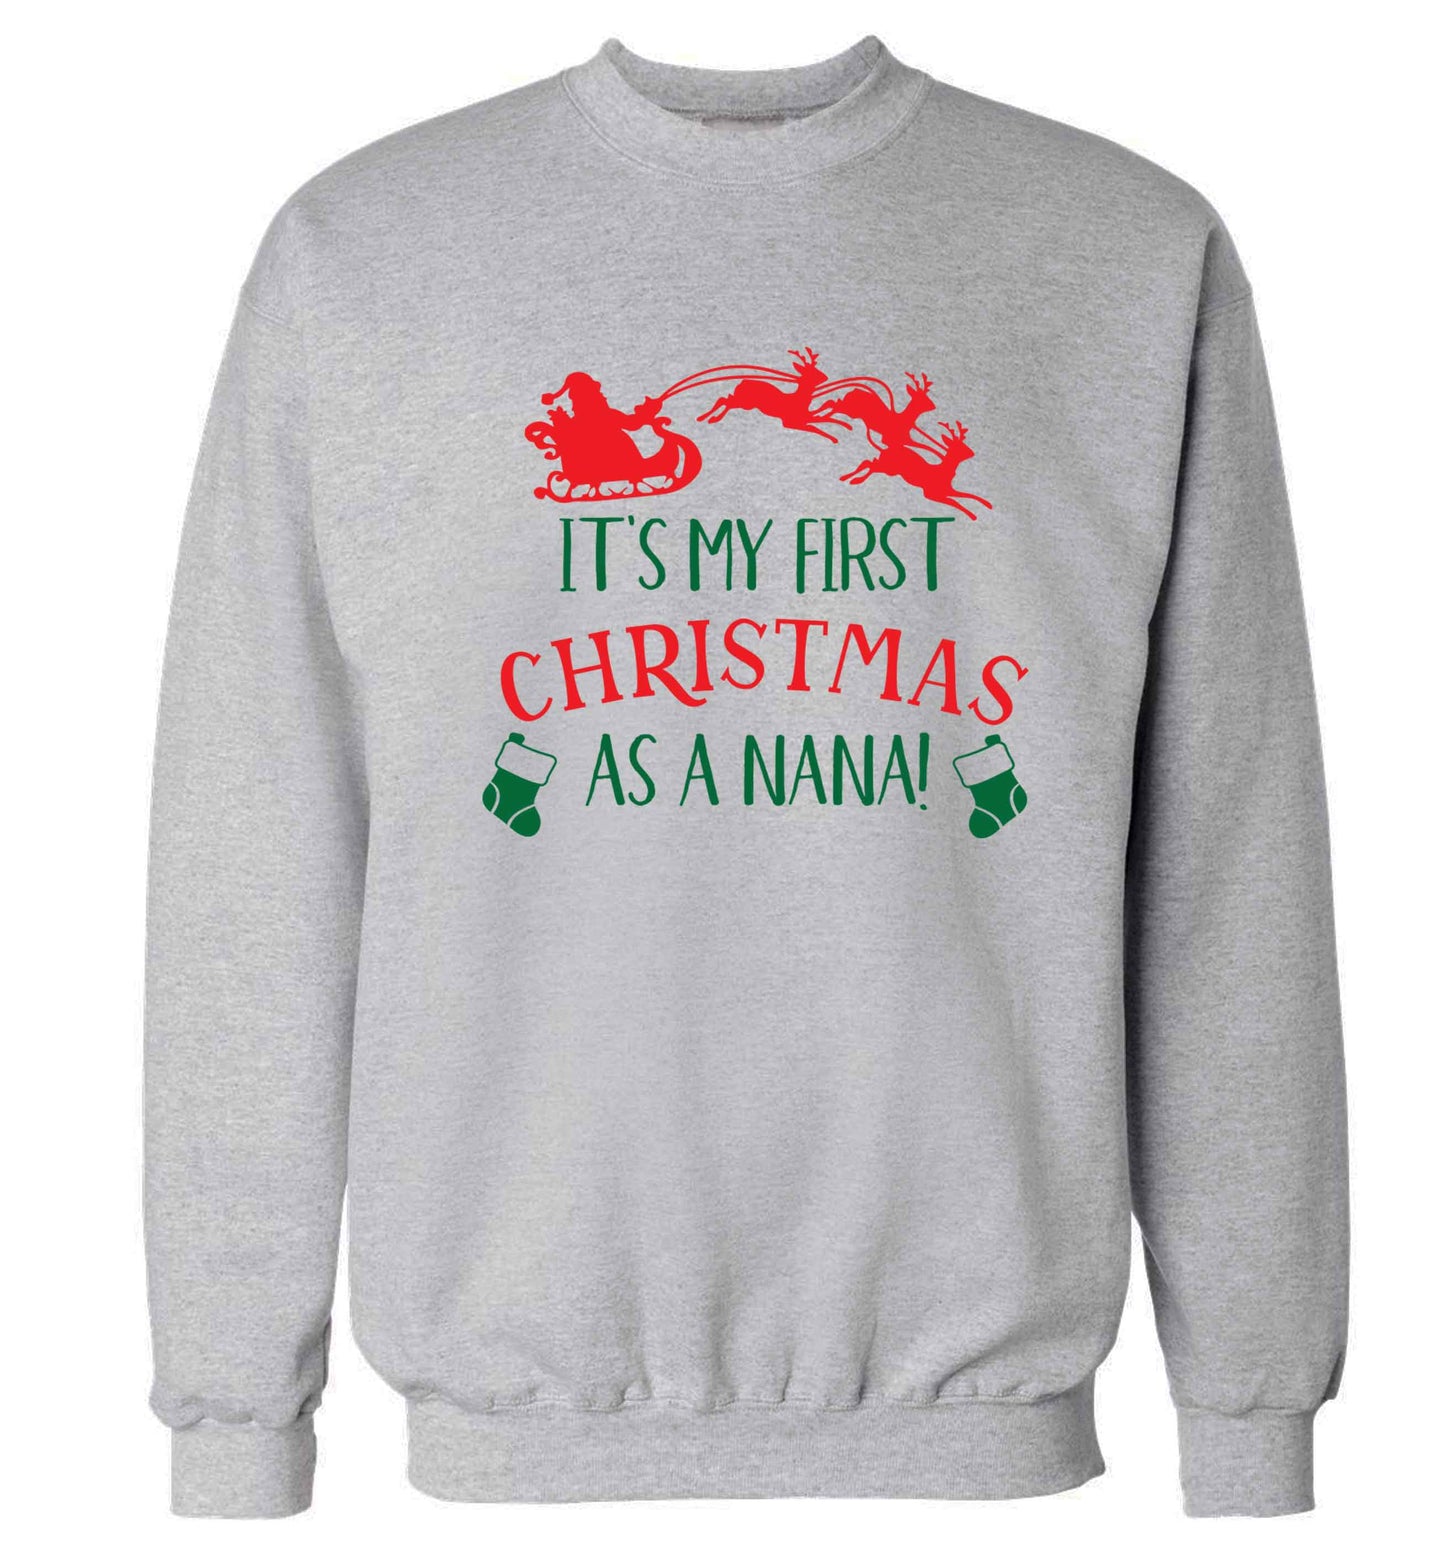 It's my first Christmas as a nana Adult's unisex grey Sweater 2XL